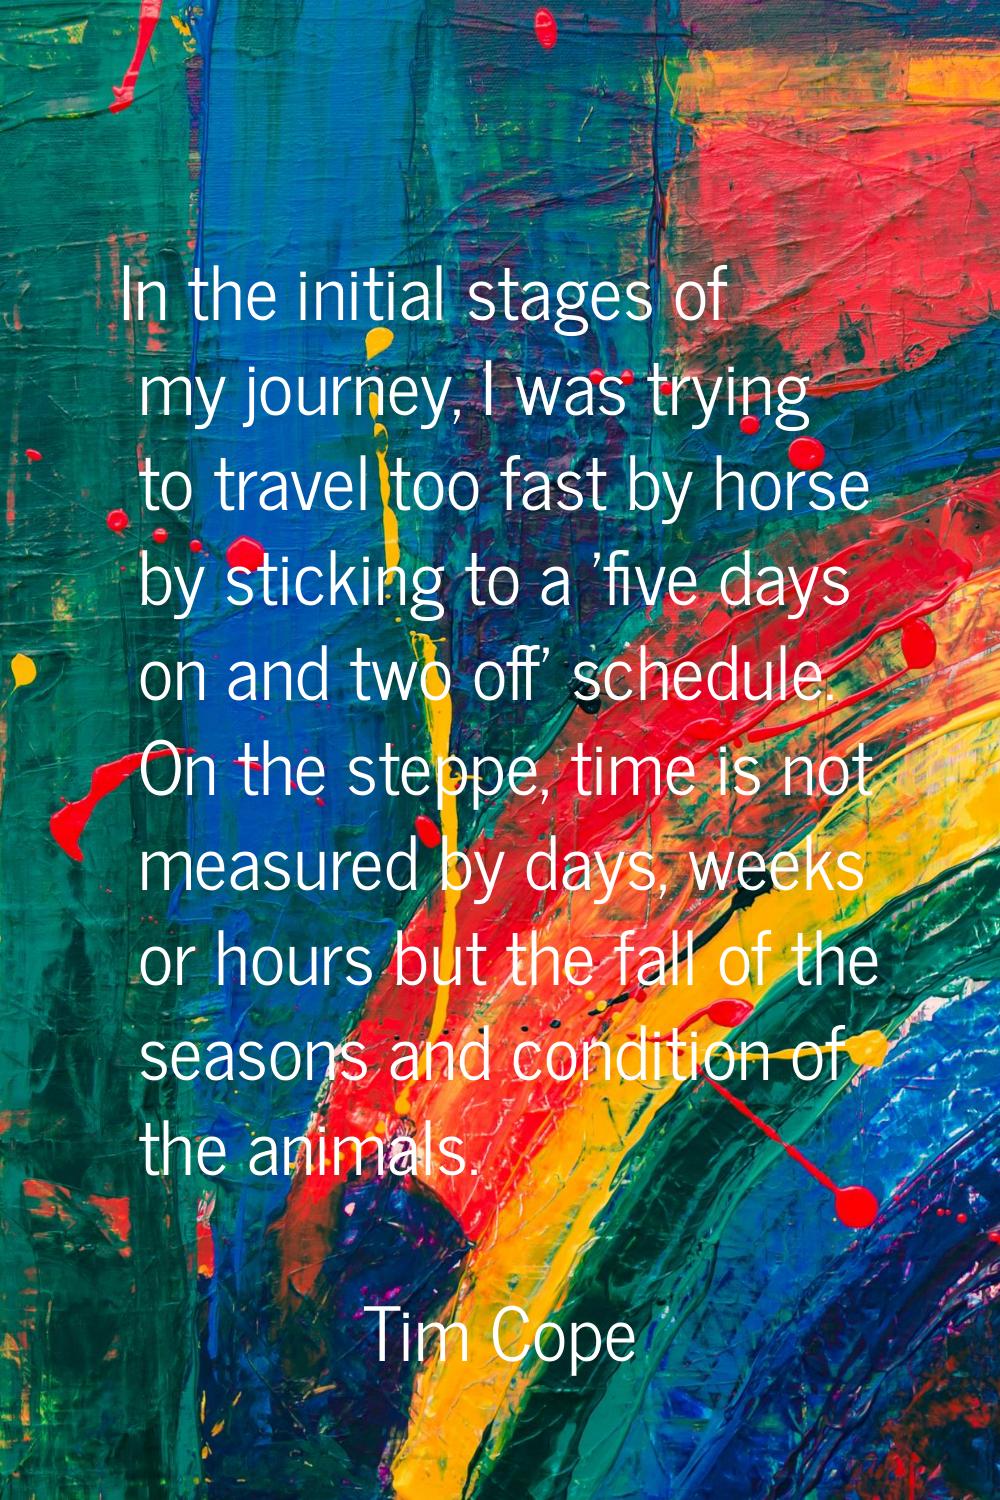 In the initial stages of my journey, I was trying to travel too fast by horse by sticking to a 'fiv